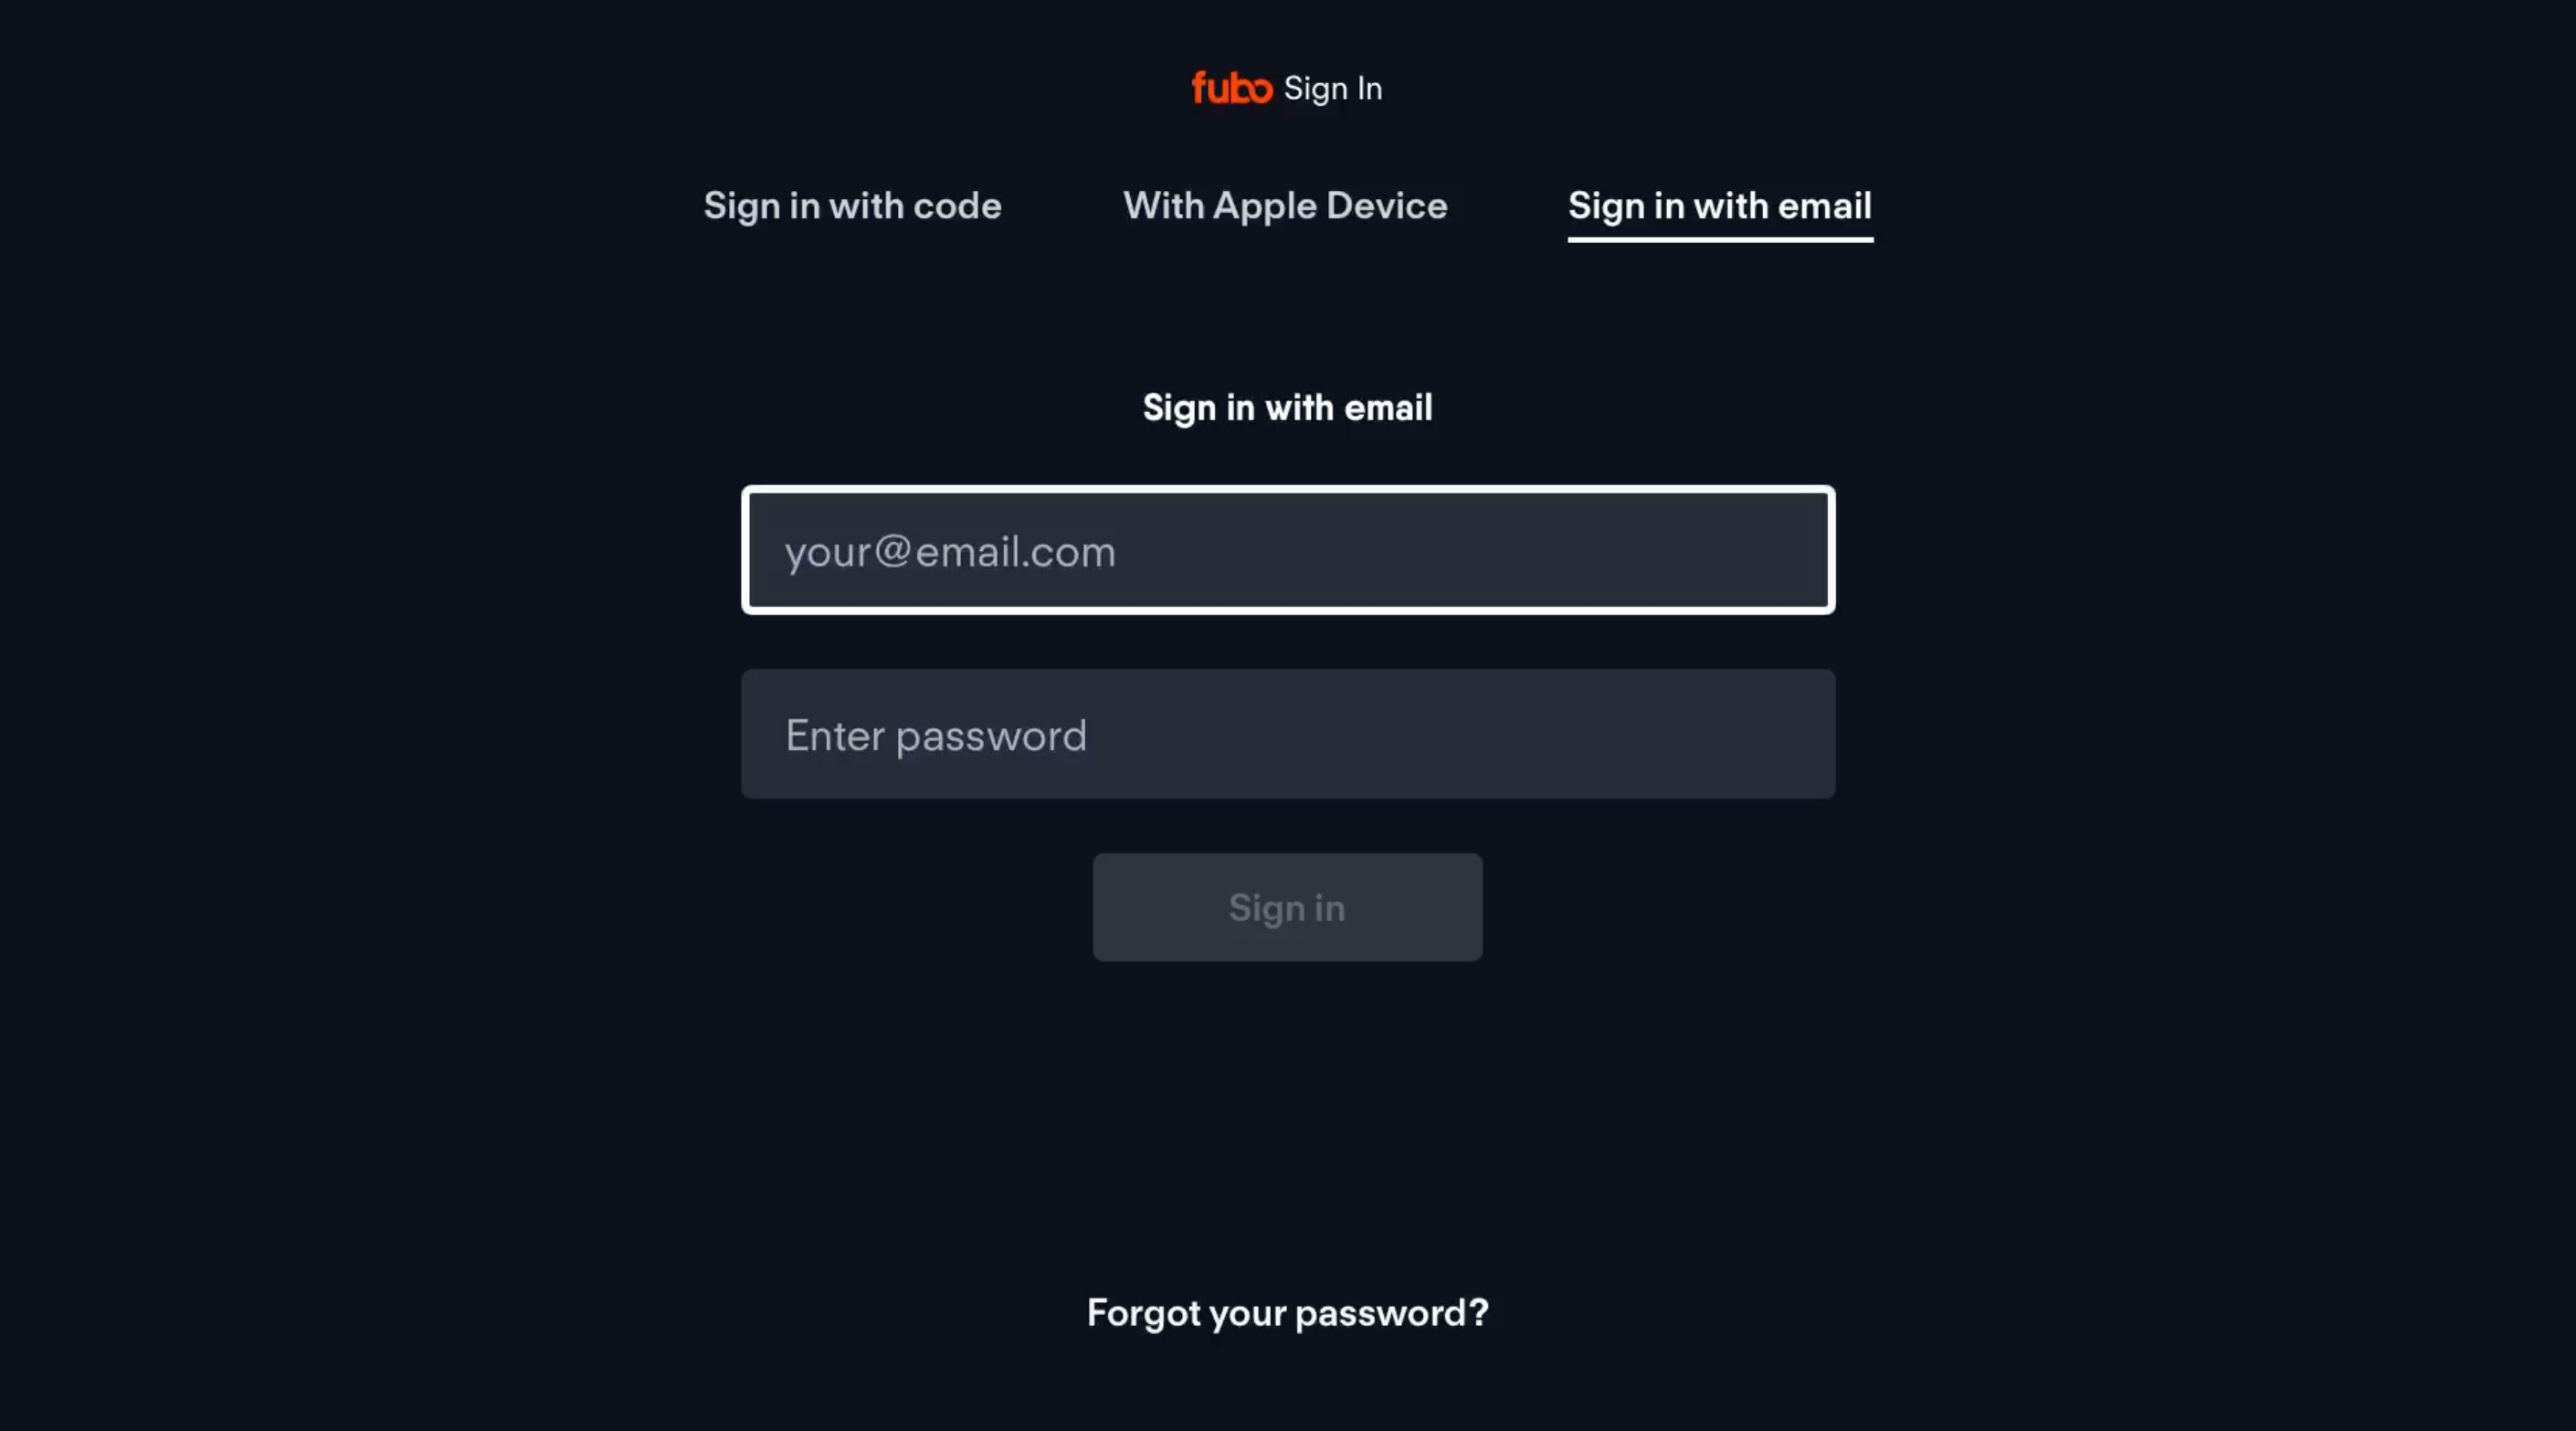 Sign in screen for the FuboTV app on Xbox with email and password fields shown